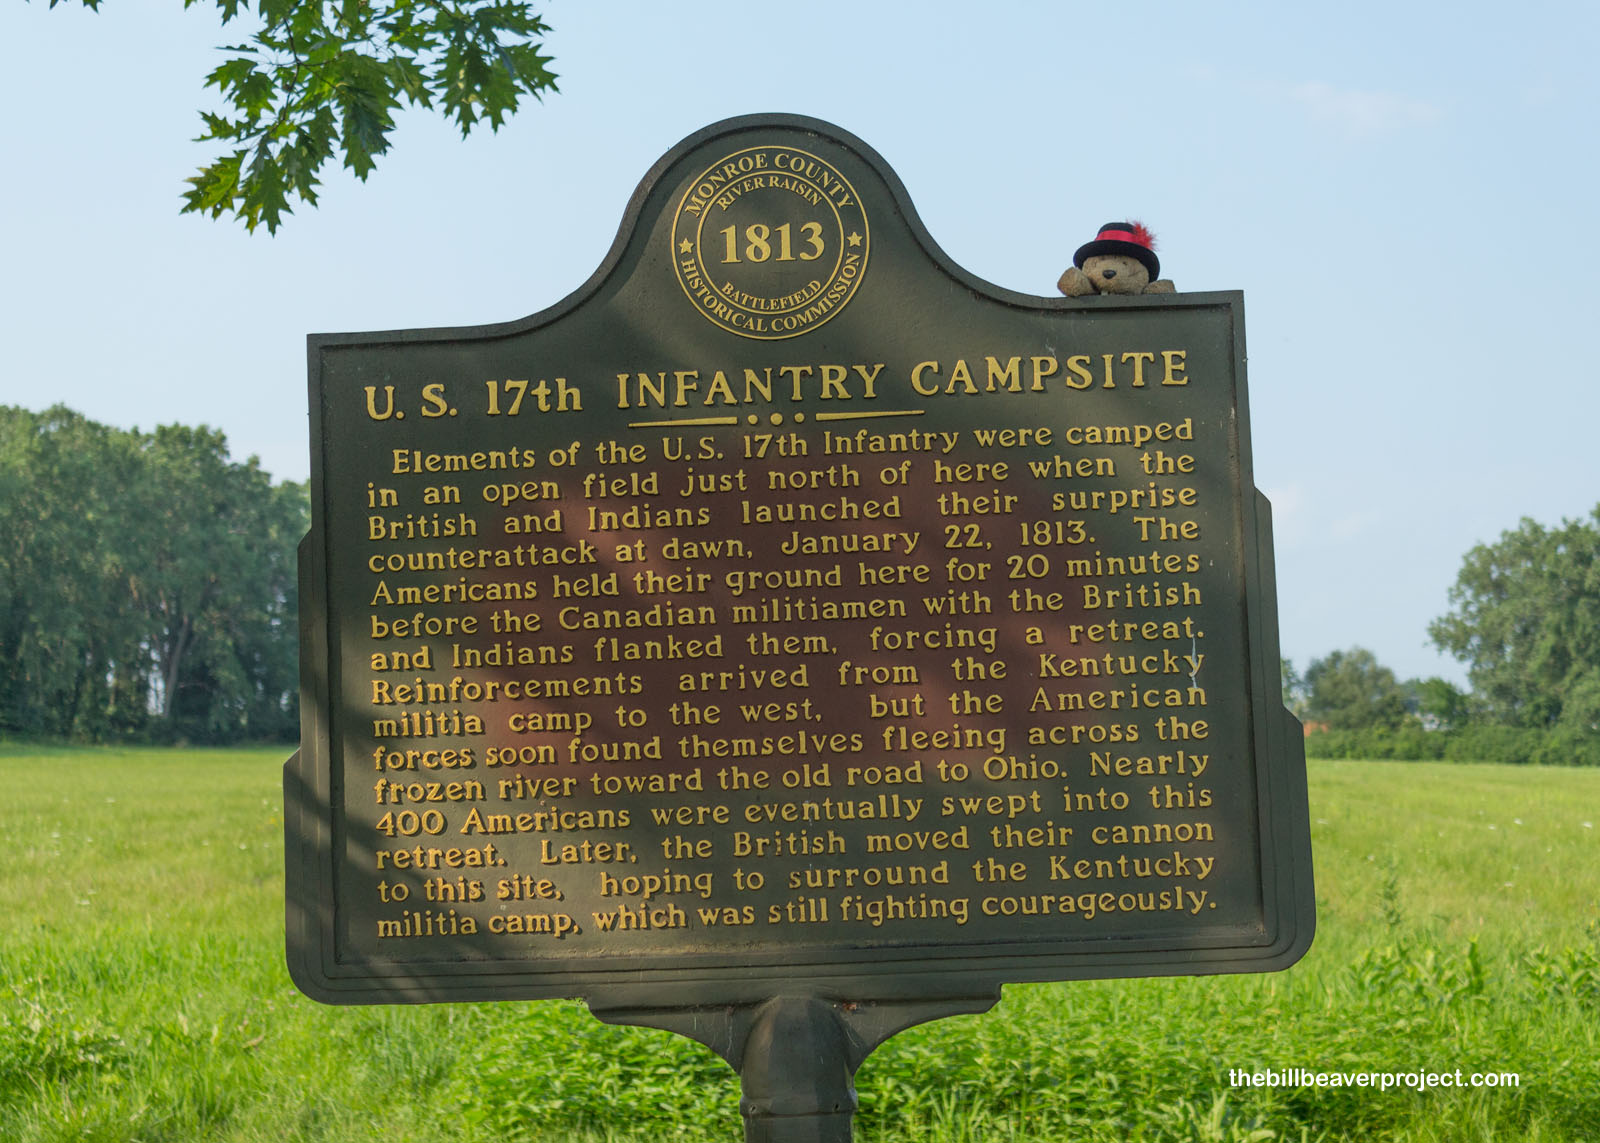 The 17th Infantry was camped out in this field when the British counterattacked!